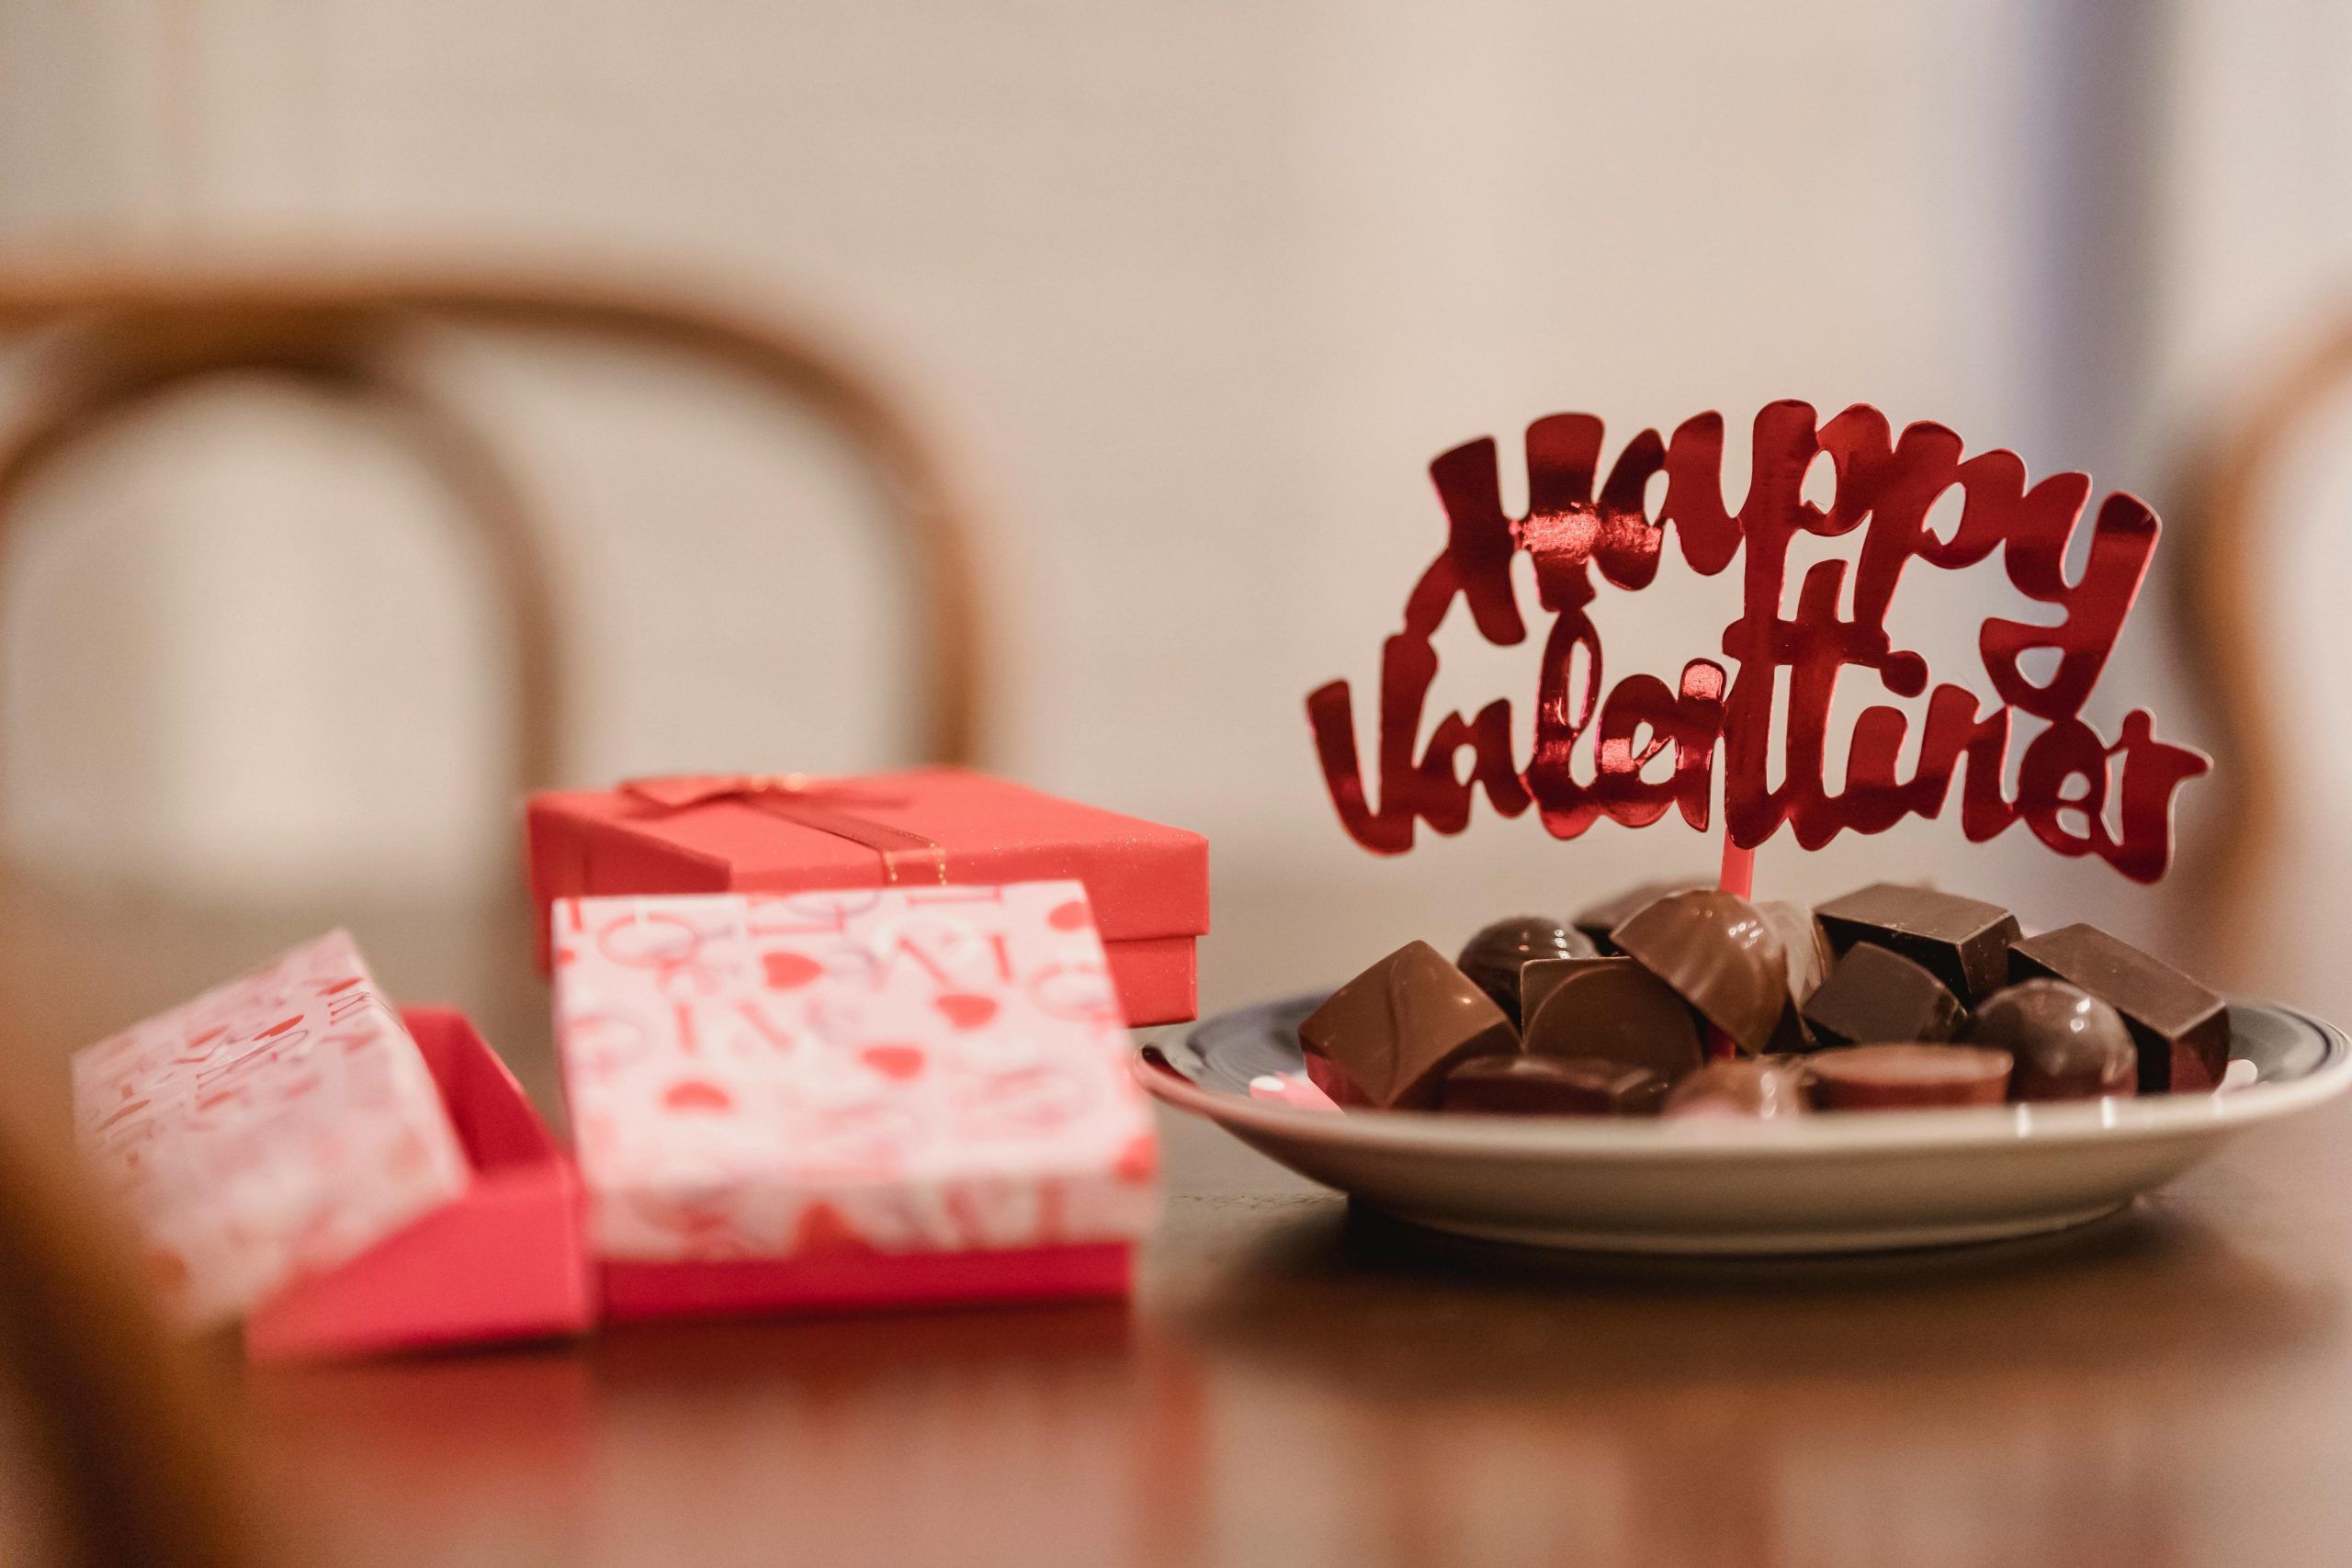 Chocolates on a plate with a Happy Valentine's Day sign